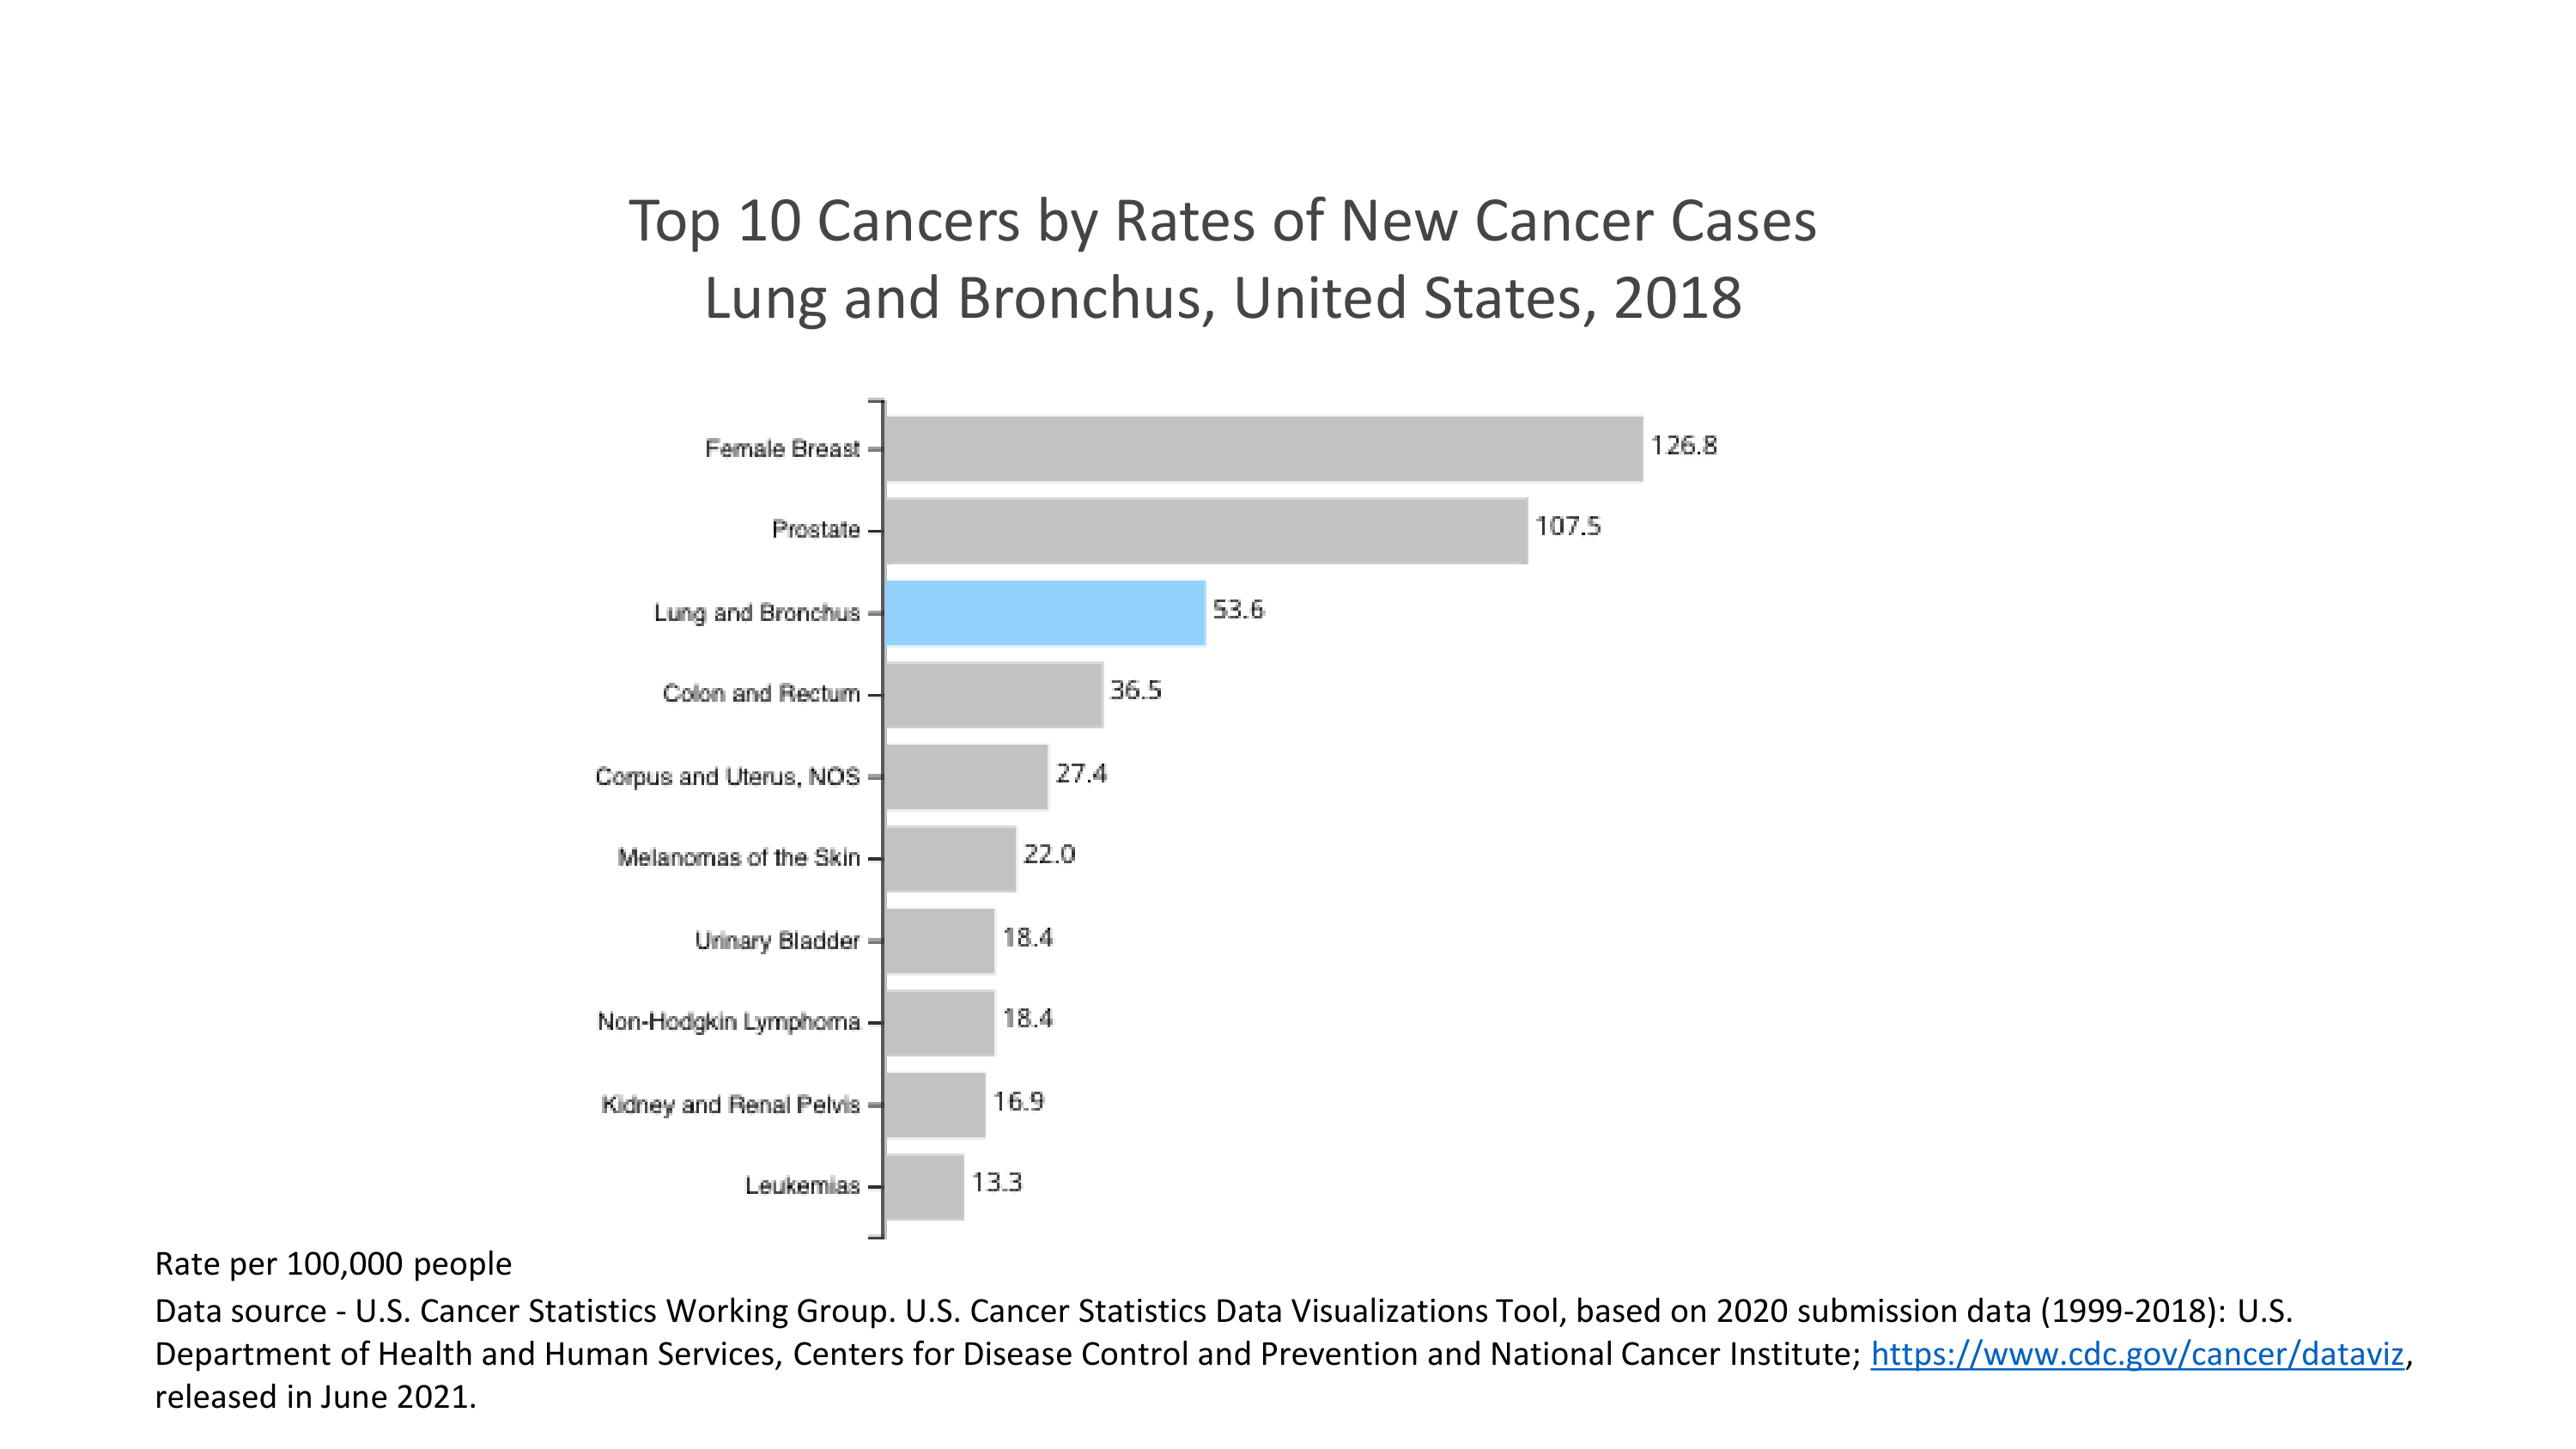 Top 10 cancer rates of ew cancer cases